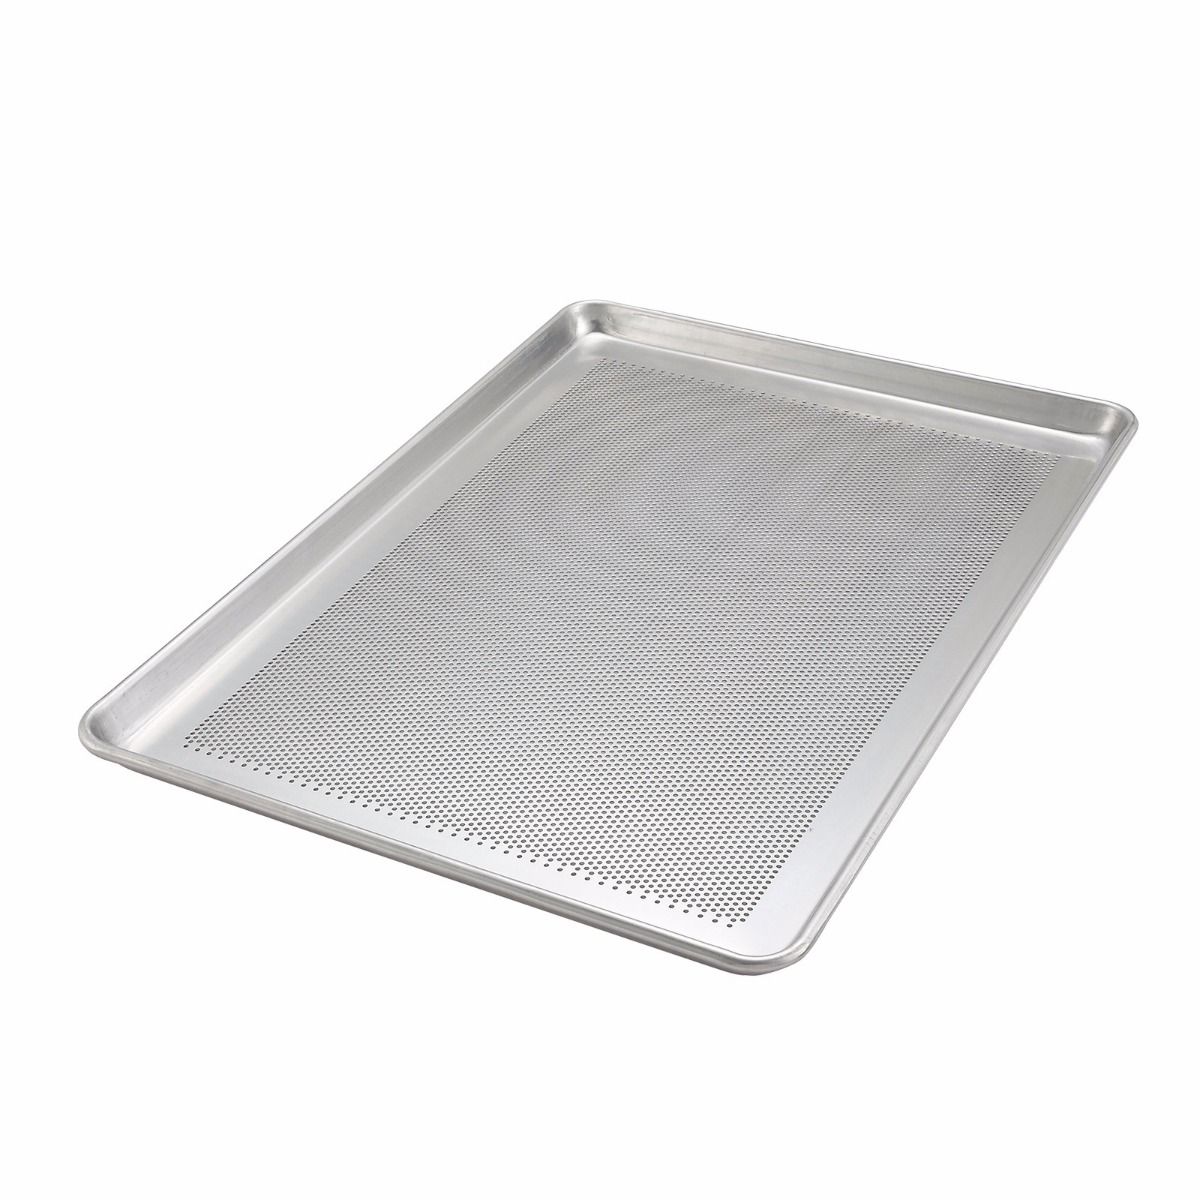 Met Lux Aluminum Full Size Baking Sheet - Perforated, Heavy Duty - 26 inch x 18 inch - 1 Count Box, Silver